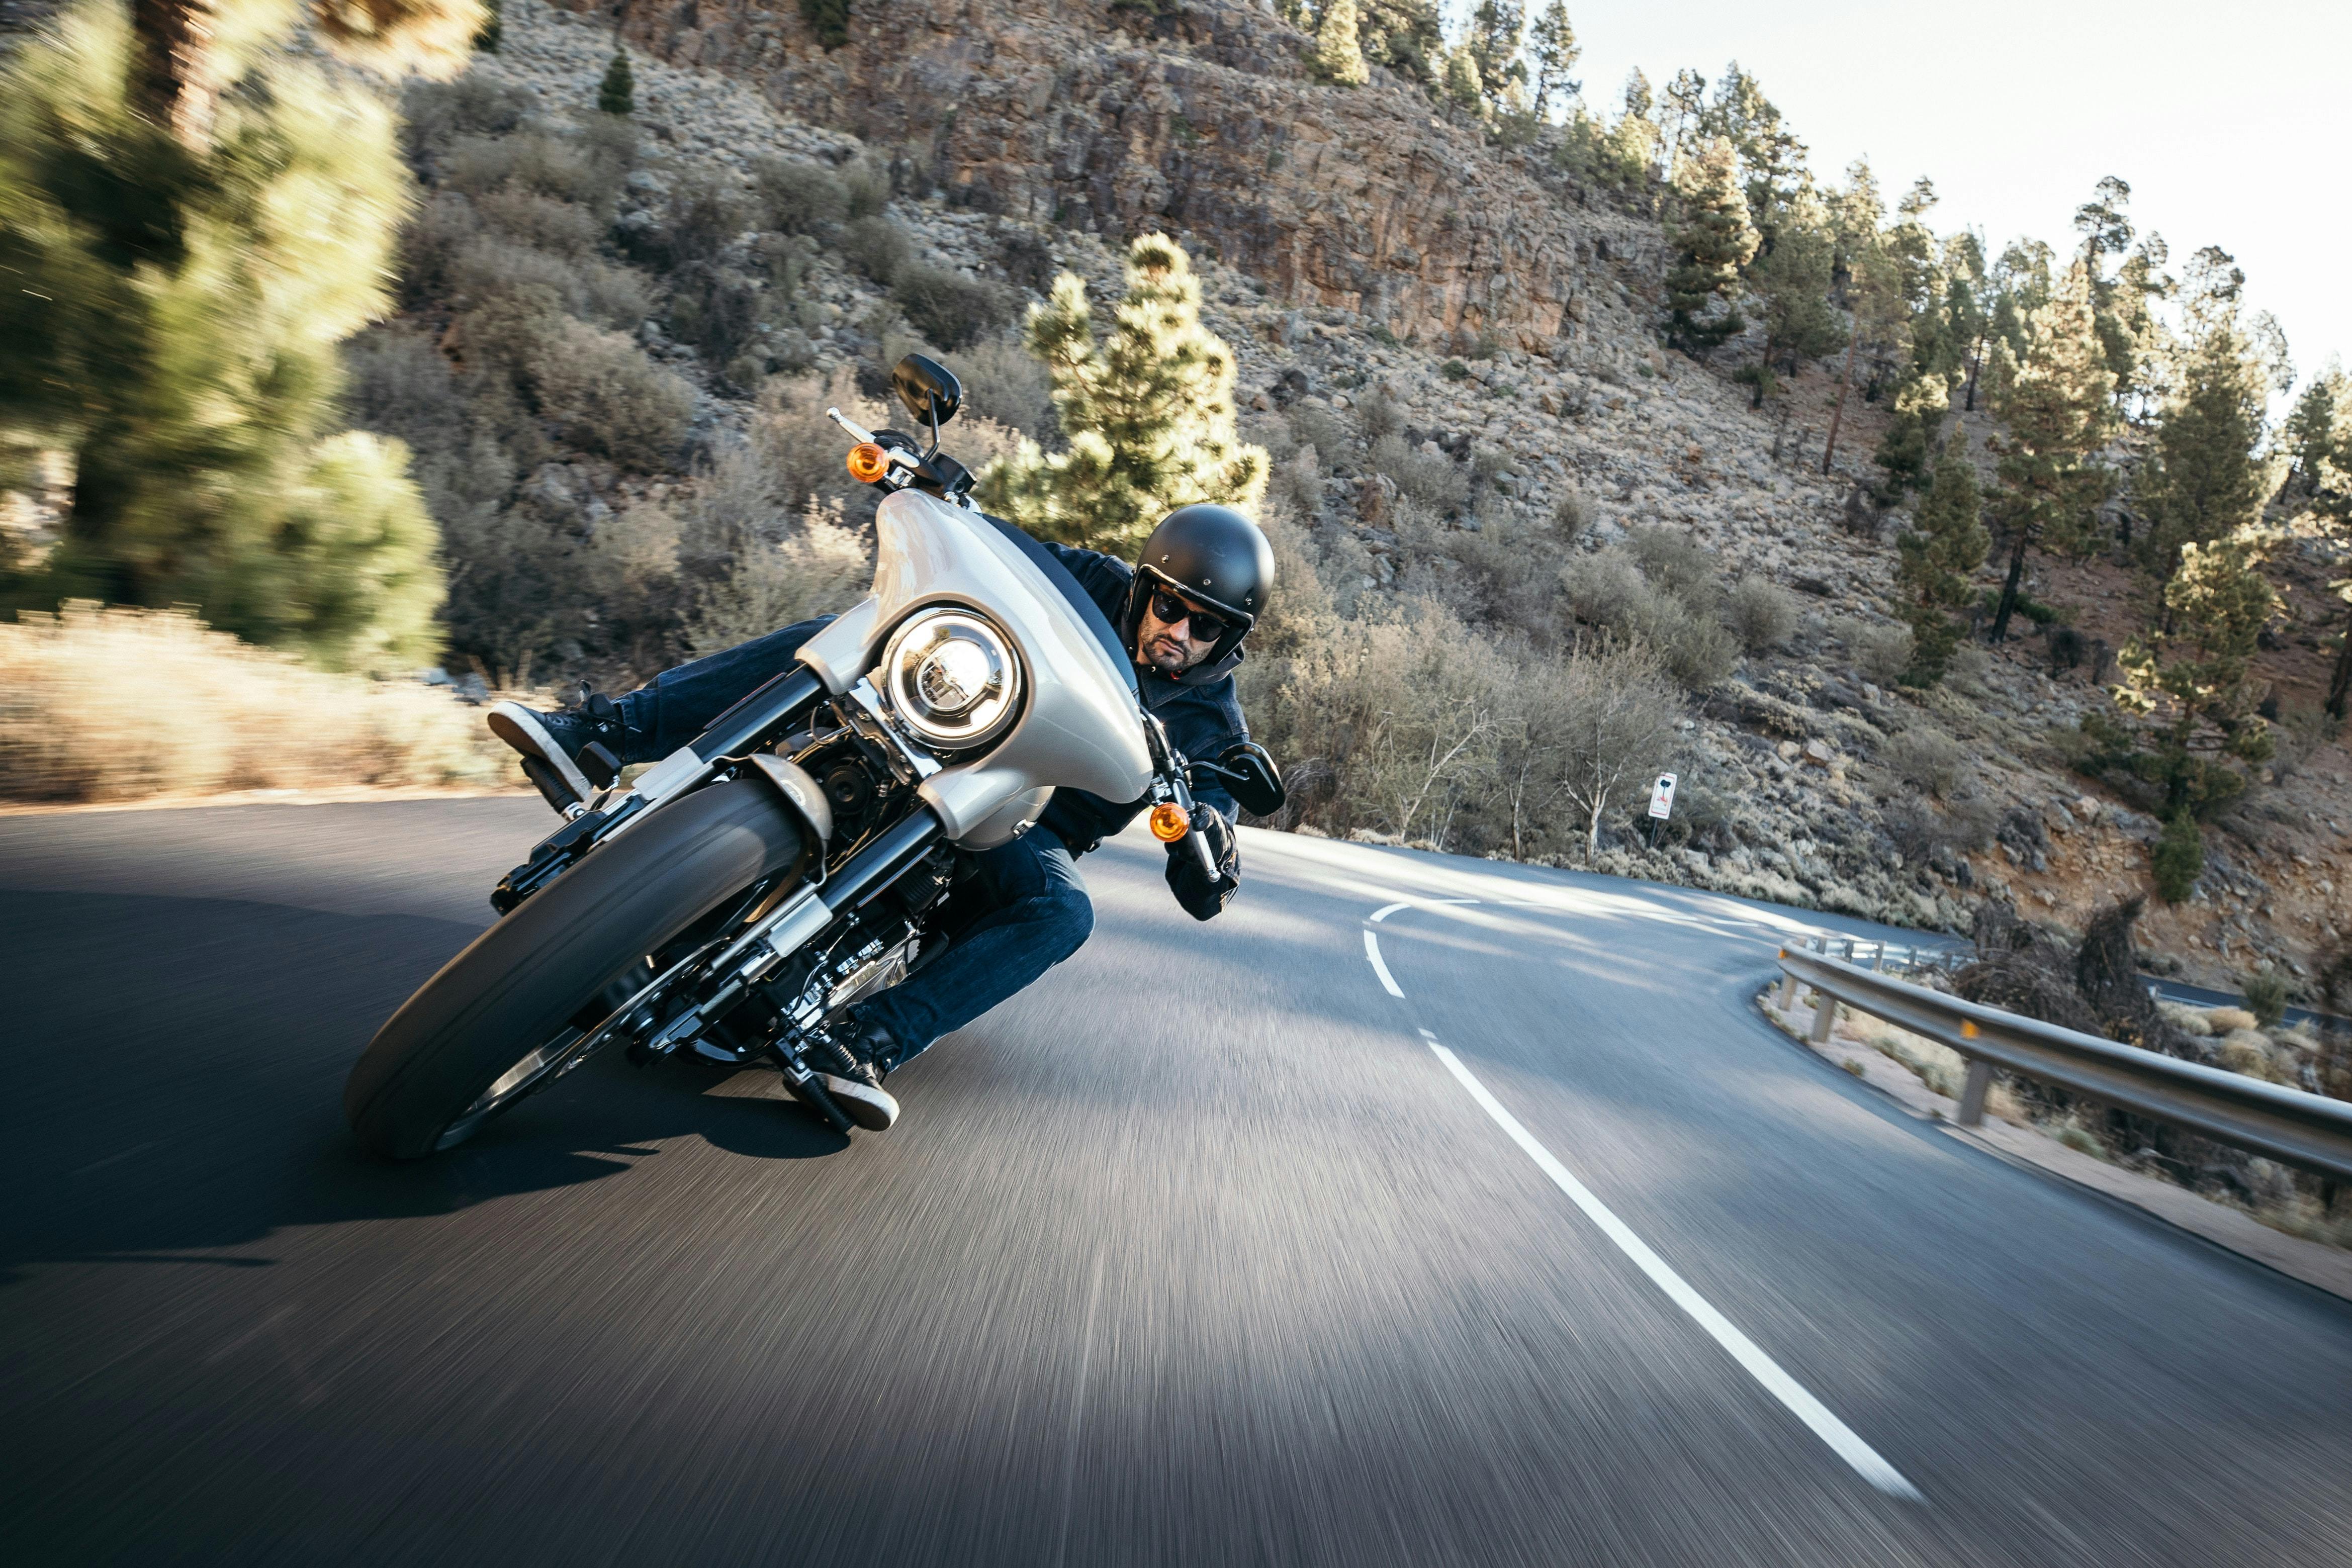 top 5 cross-country motorcycle trips with a motorcycle rental from Riders Share, a nation-wide motorcycle rental company